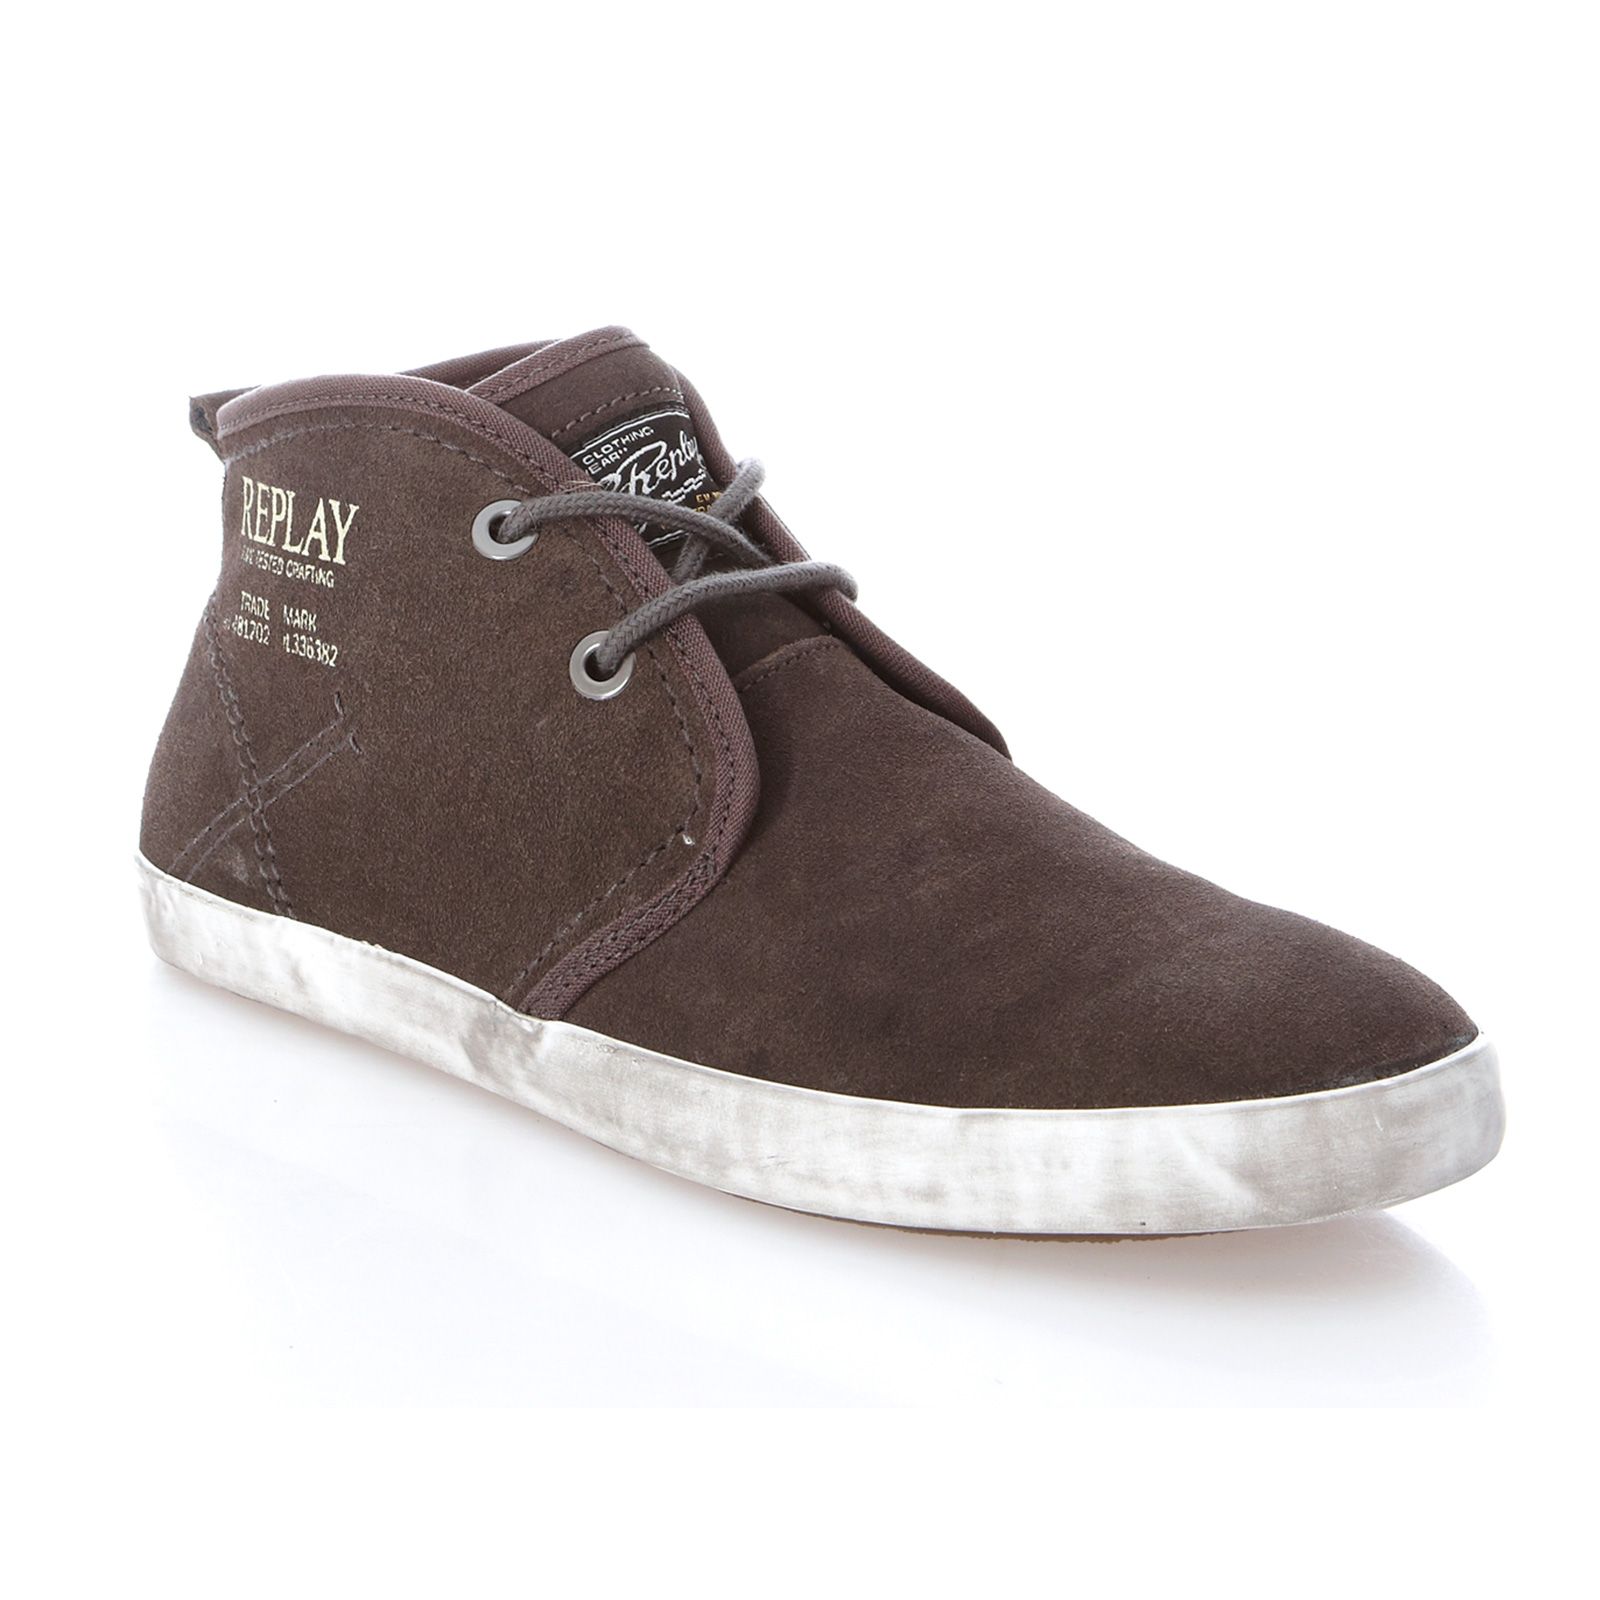 Chaussures Brandalley - Replay Chaussures montantes Capitan grises Prix 90,00 Euros